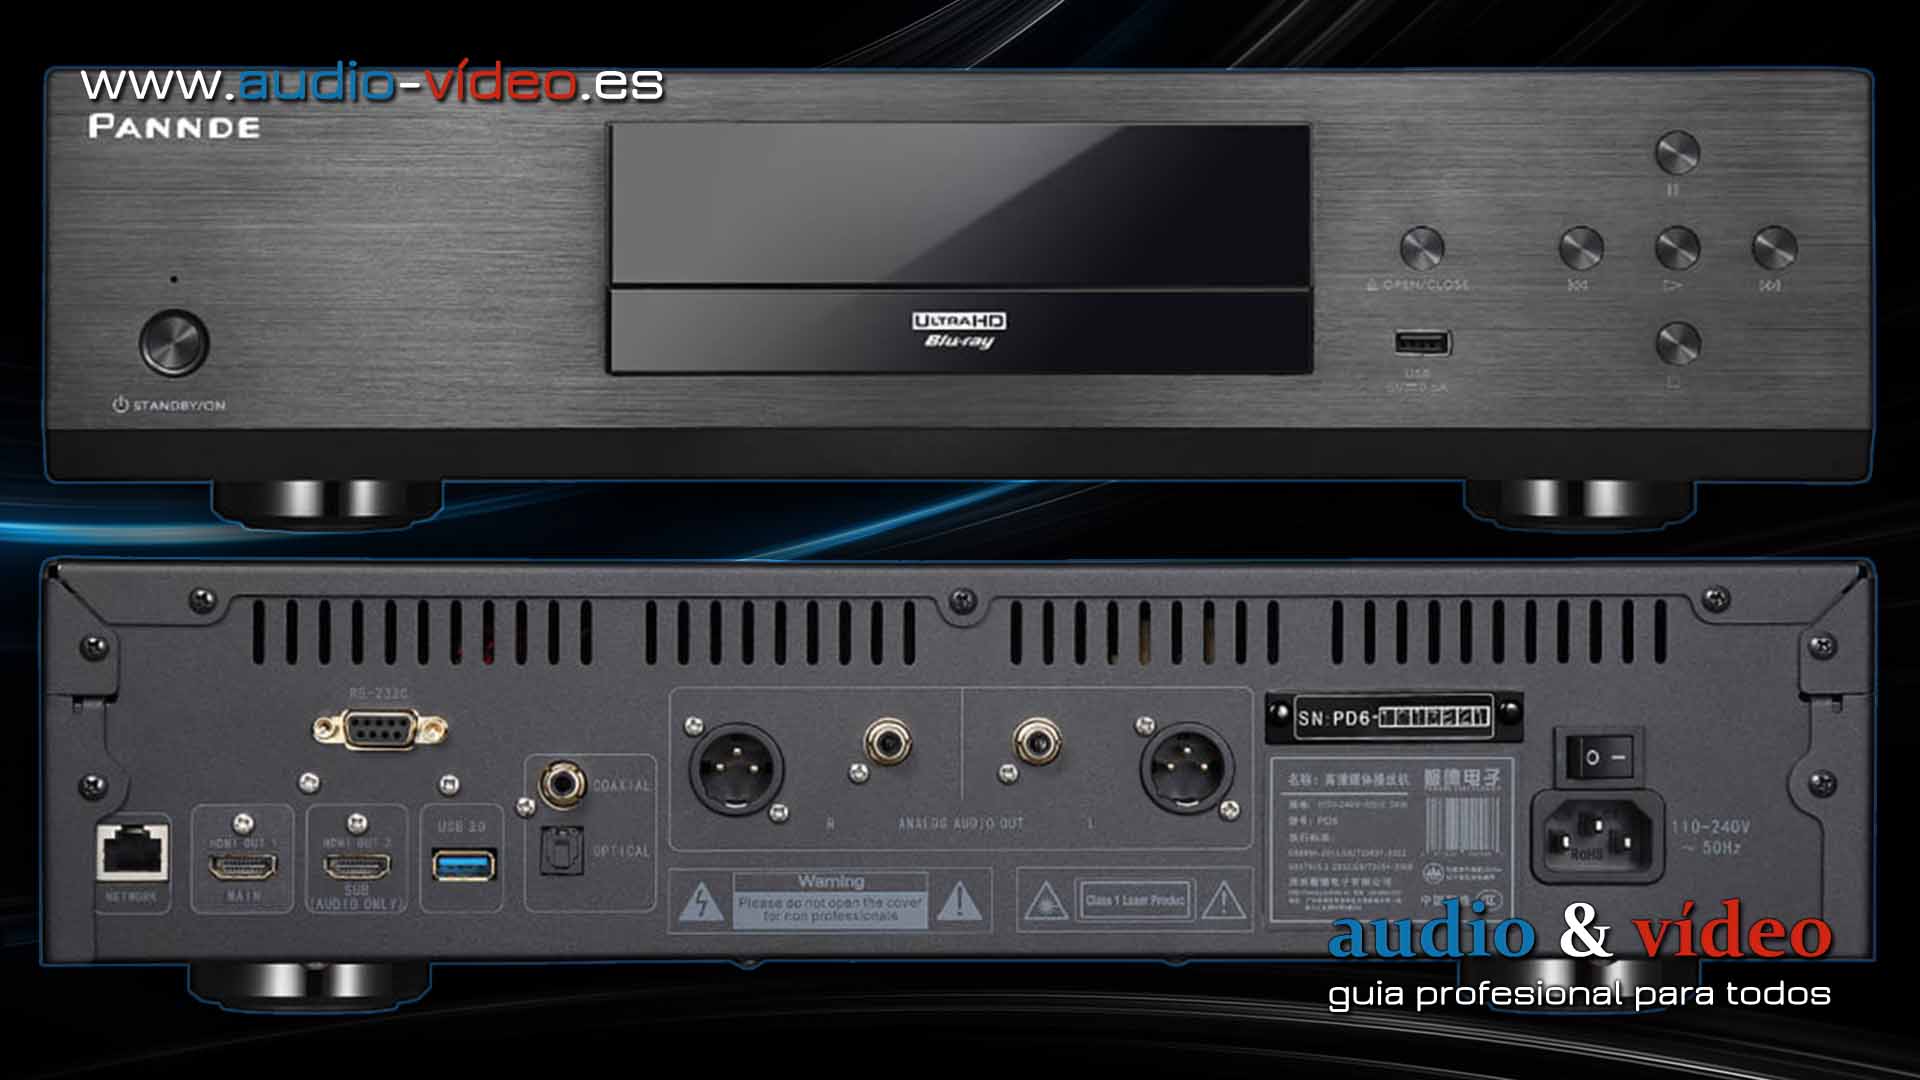 Pannde PD-6 - reproductor Blu-ray UHD HighEnd ▶️ Reproductores